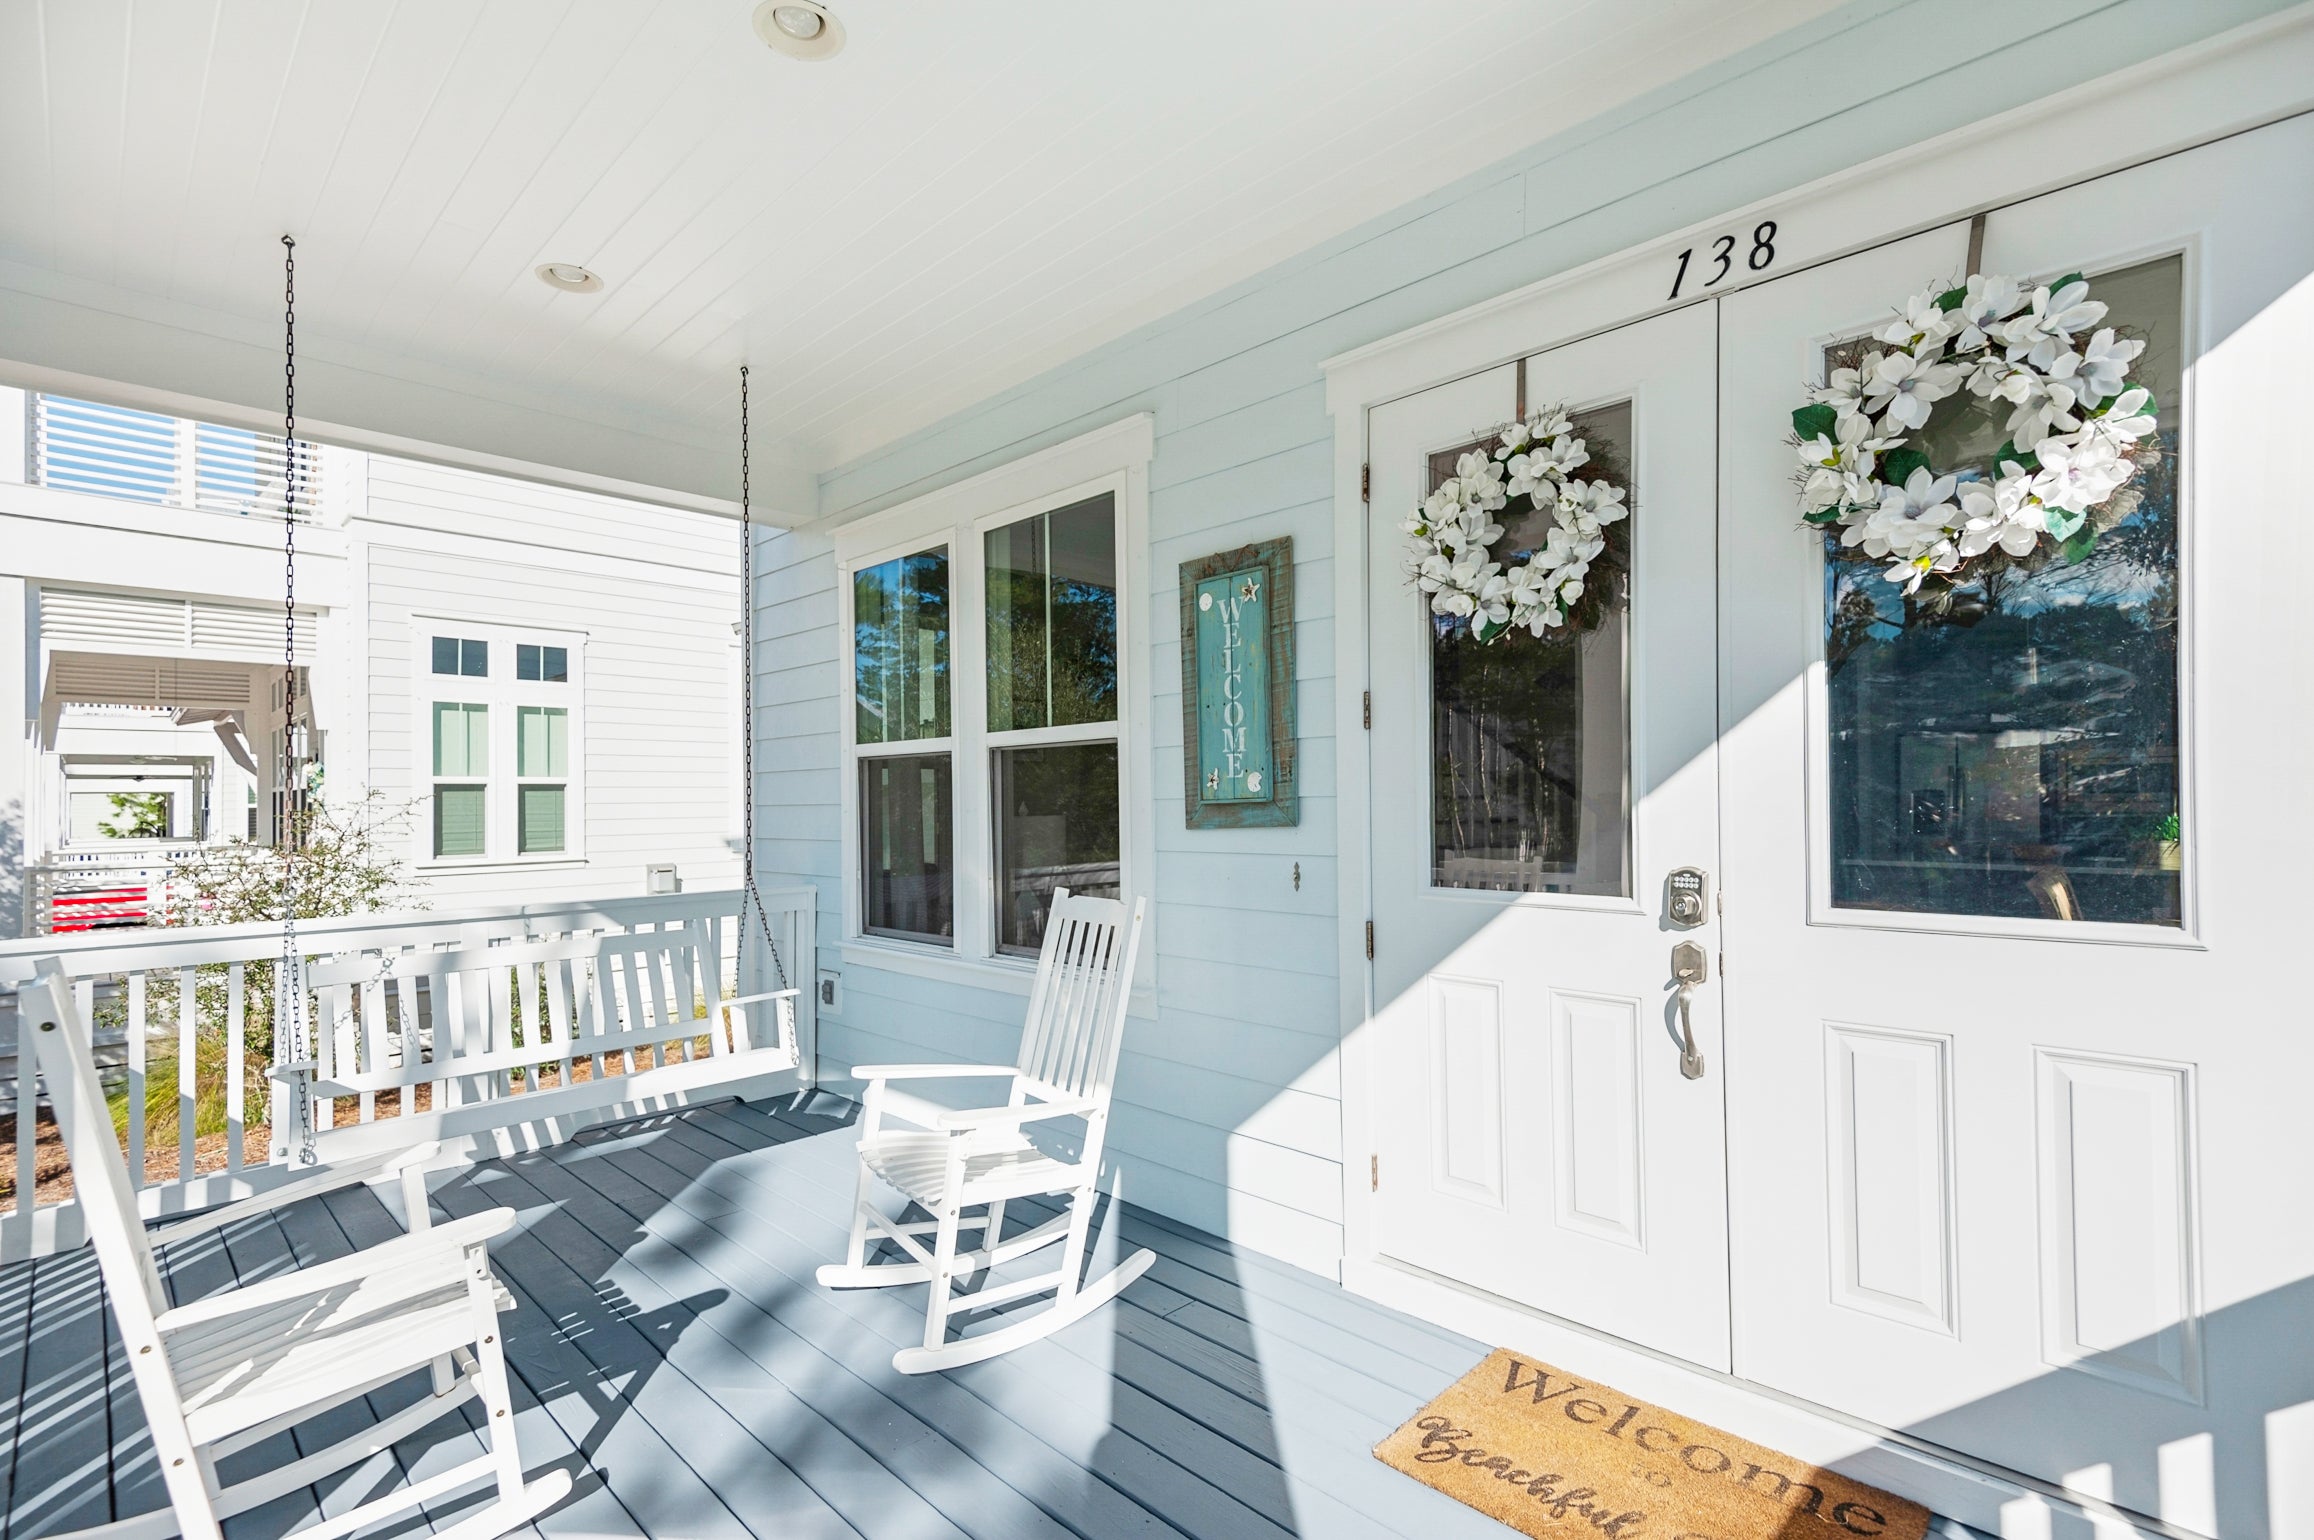 Beautiful and welcoming front porch